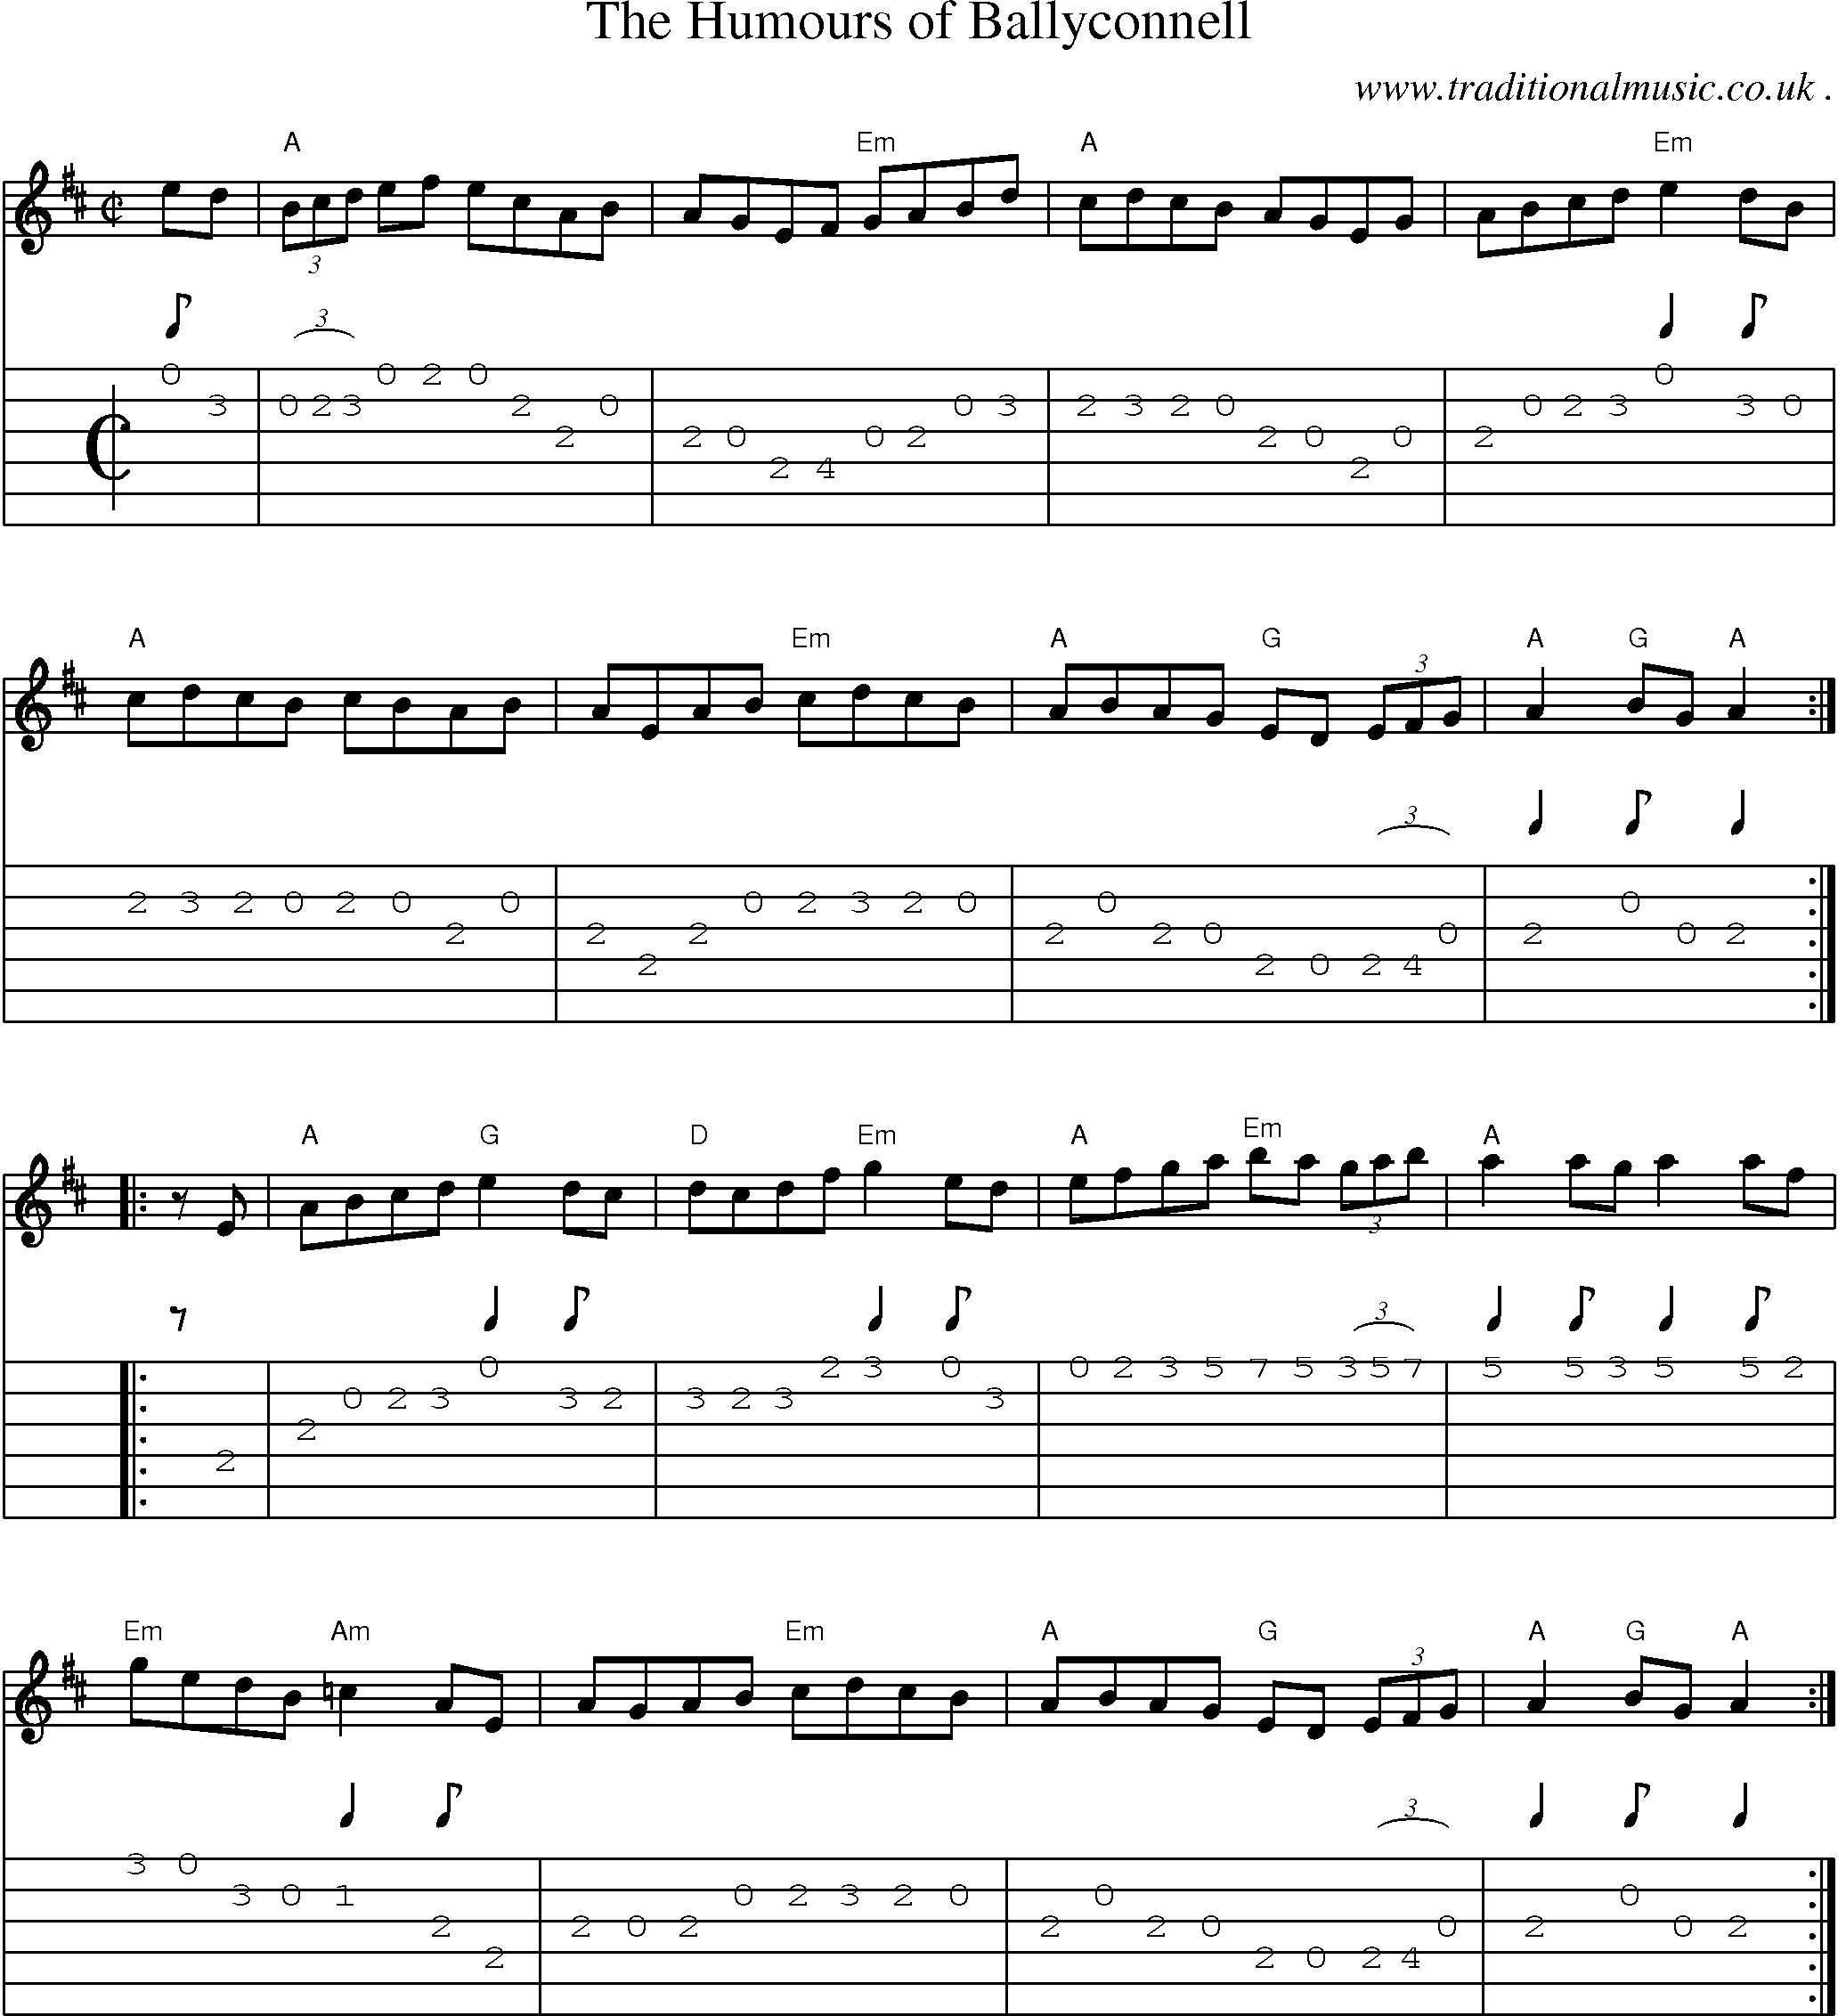 Music Score and Guitar Tabs for The Humours Of Ballyconnell